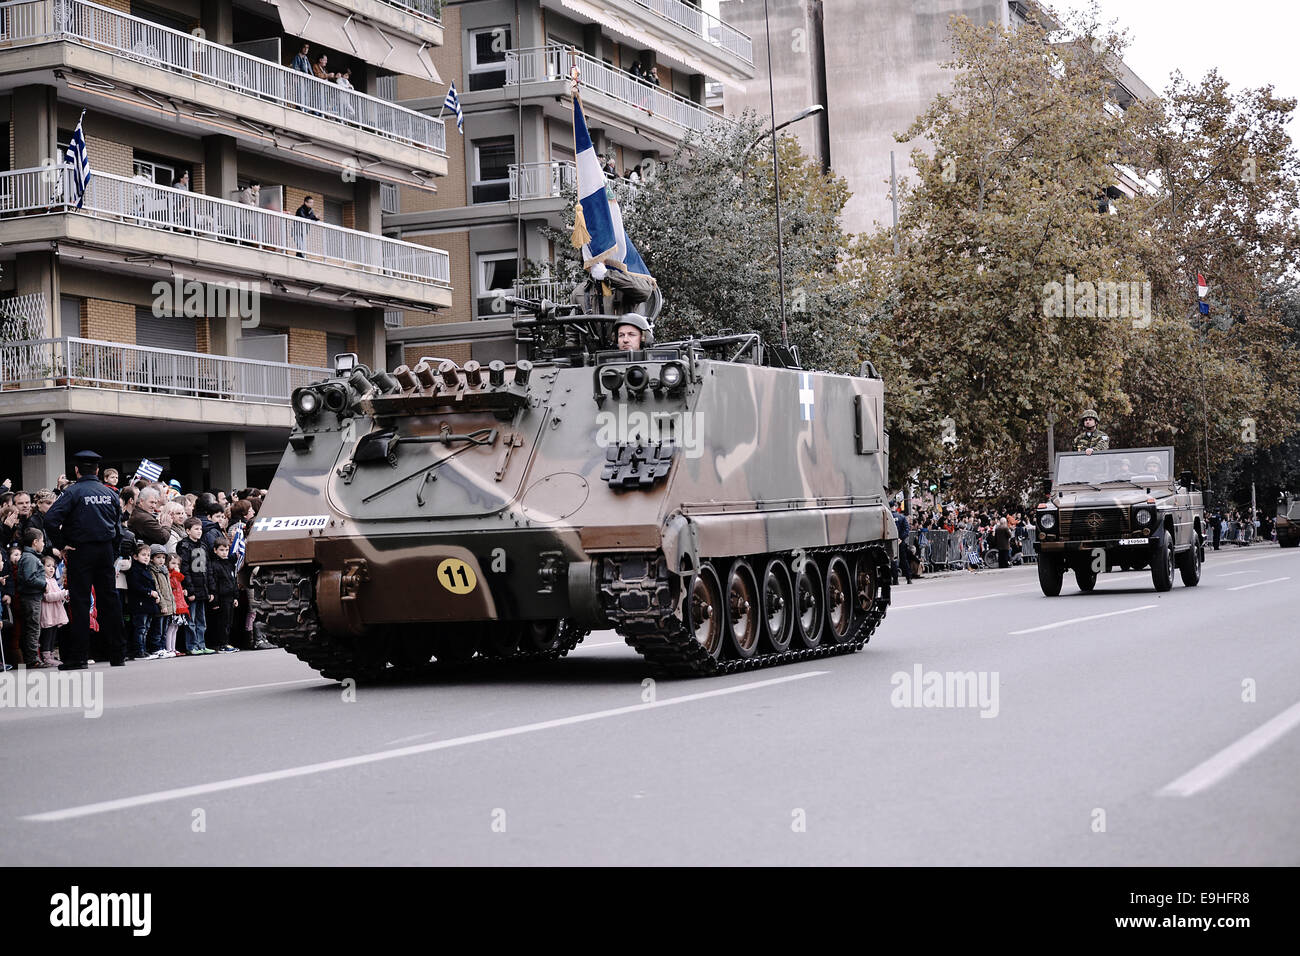 Thessaloniki, Greece. 28th October, 2014. A M113 Vehicle of the Greek Army during a military parade that was held in Thessaloniki due to the celebrations of the 28th of October anniversary, the date that Greece entered the World War II in 1940. Credit:  Giannis Papanikos/Alamy Live News Stock Photo